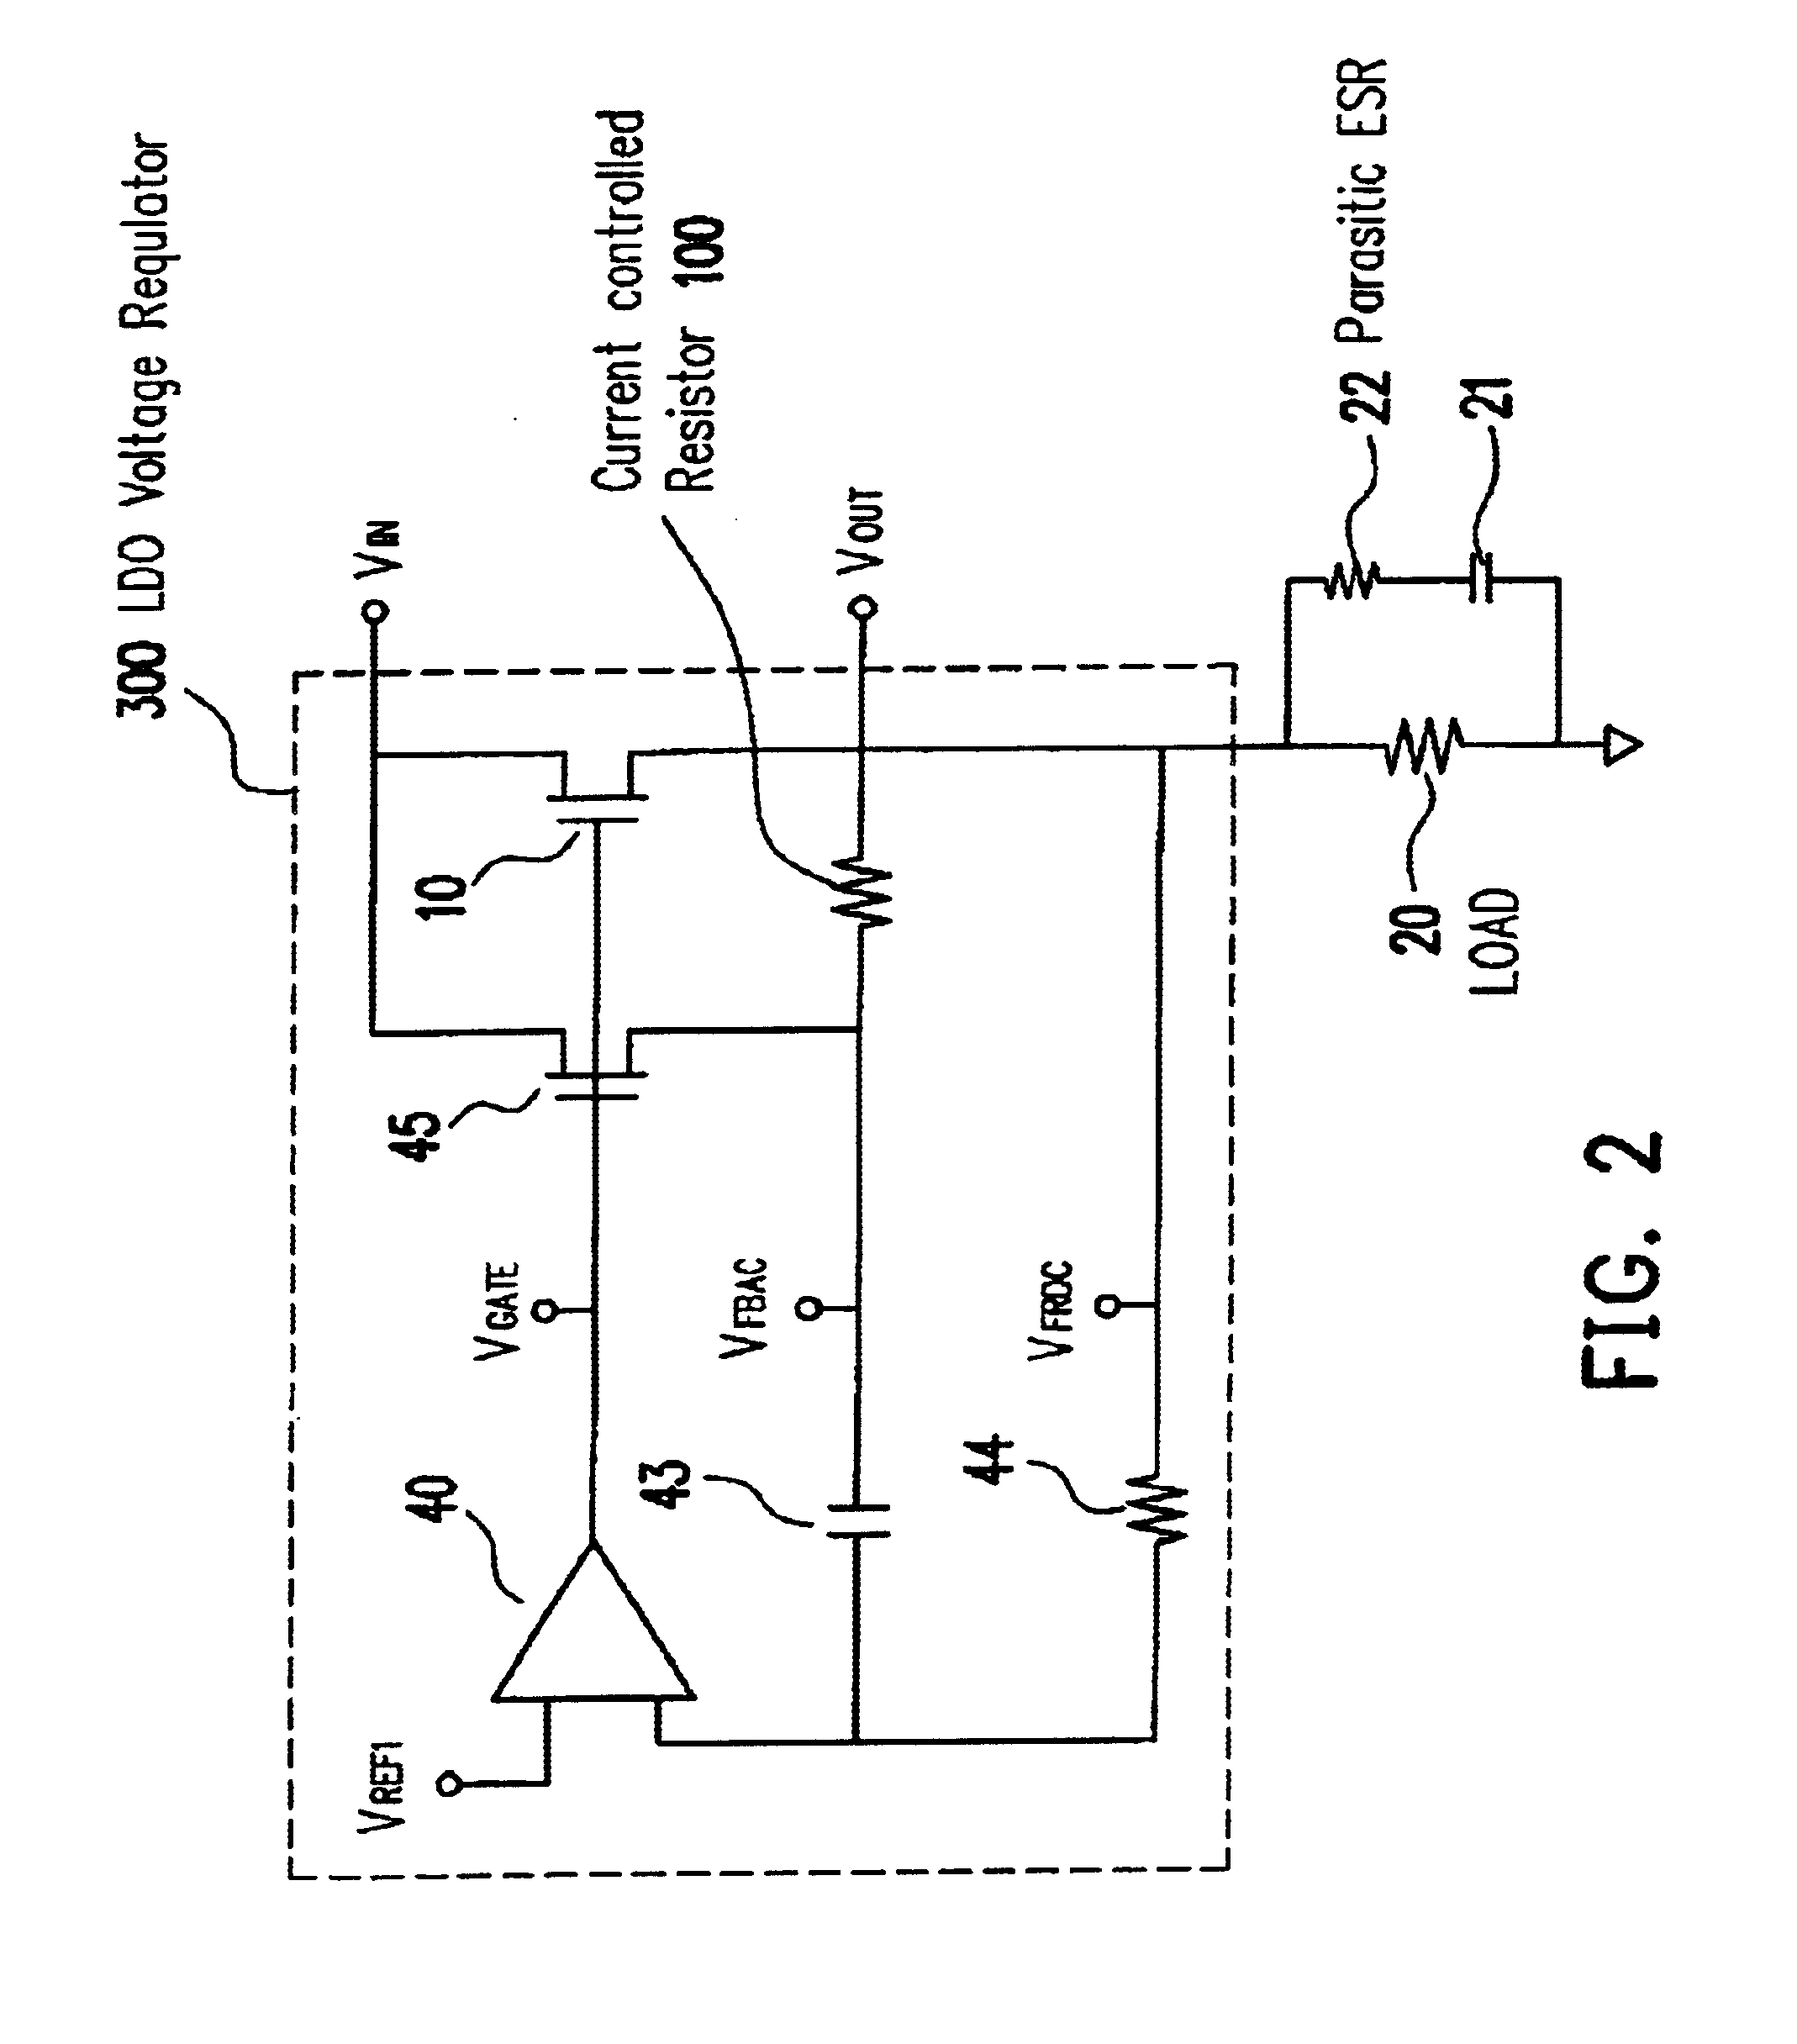 Low drop-out voltage regulator and an adaptive frequency compensation